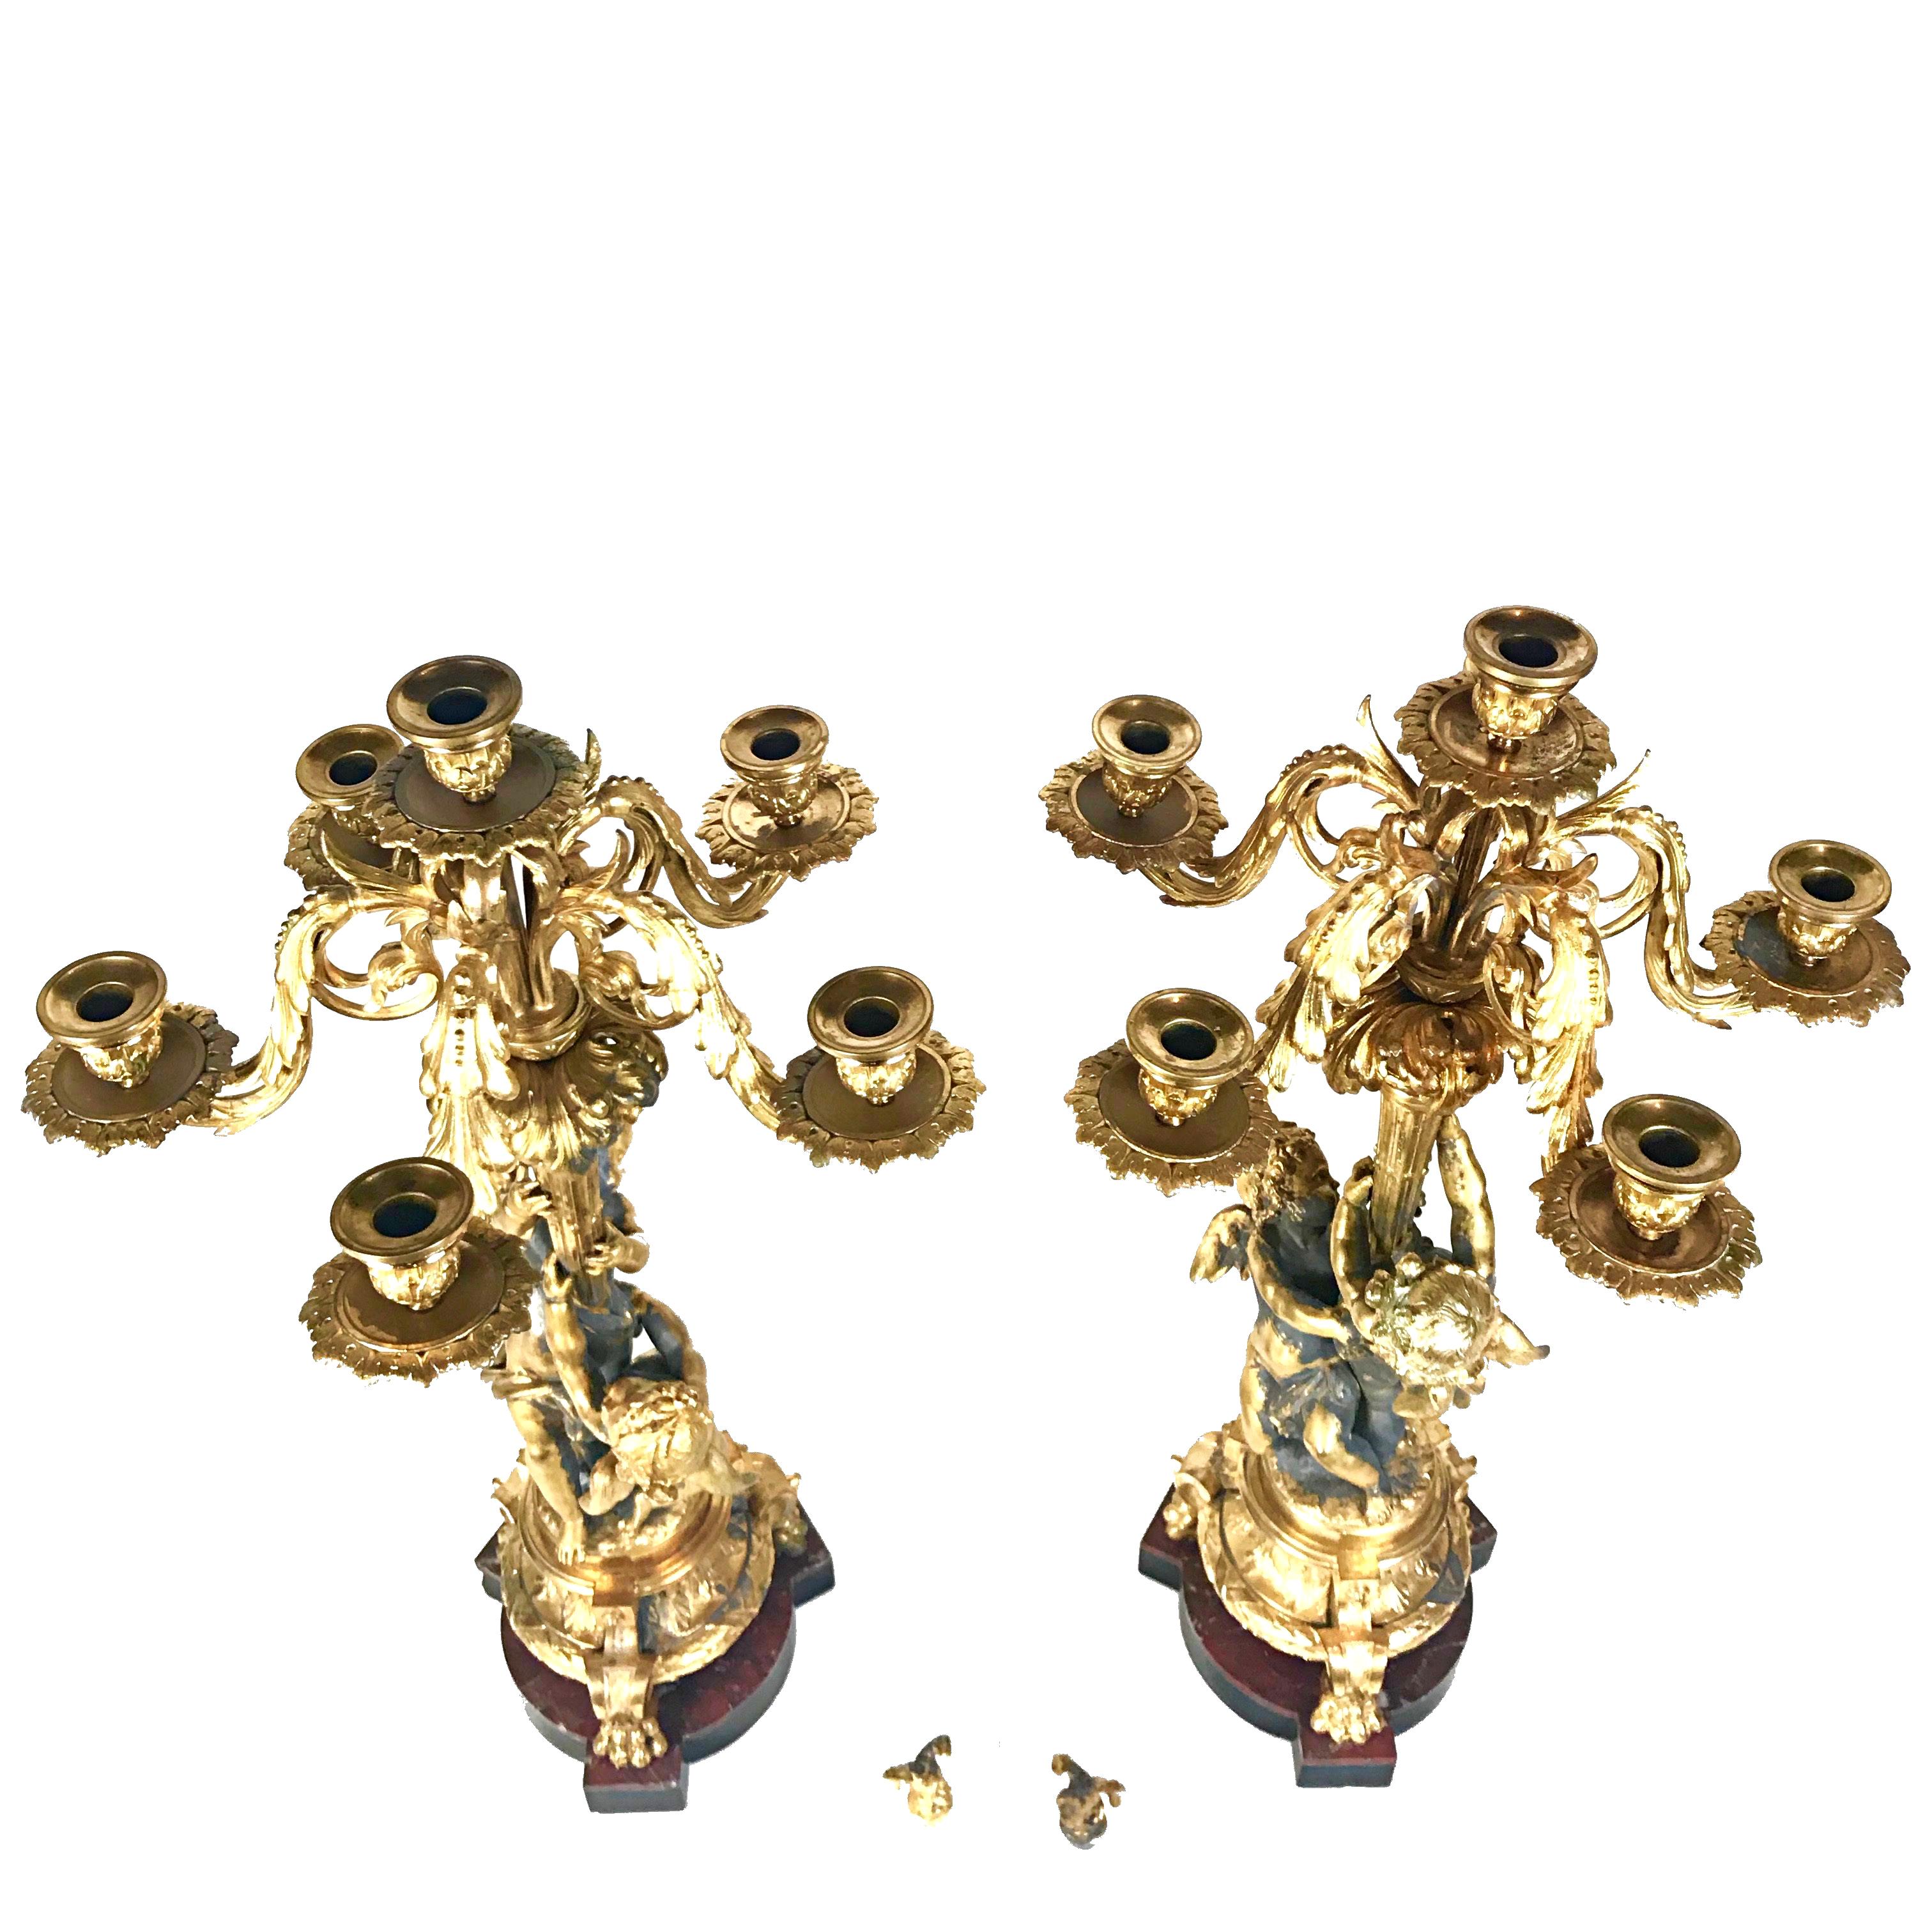 Pair Huge 19th Century Philippe Mourey Ormolu Putti Candelabras, 1870s, France For Sale 12